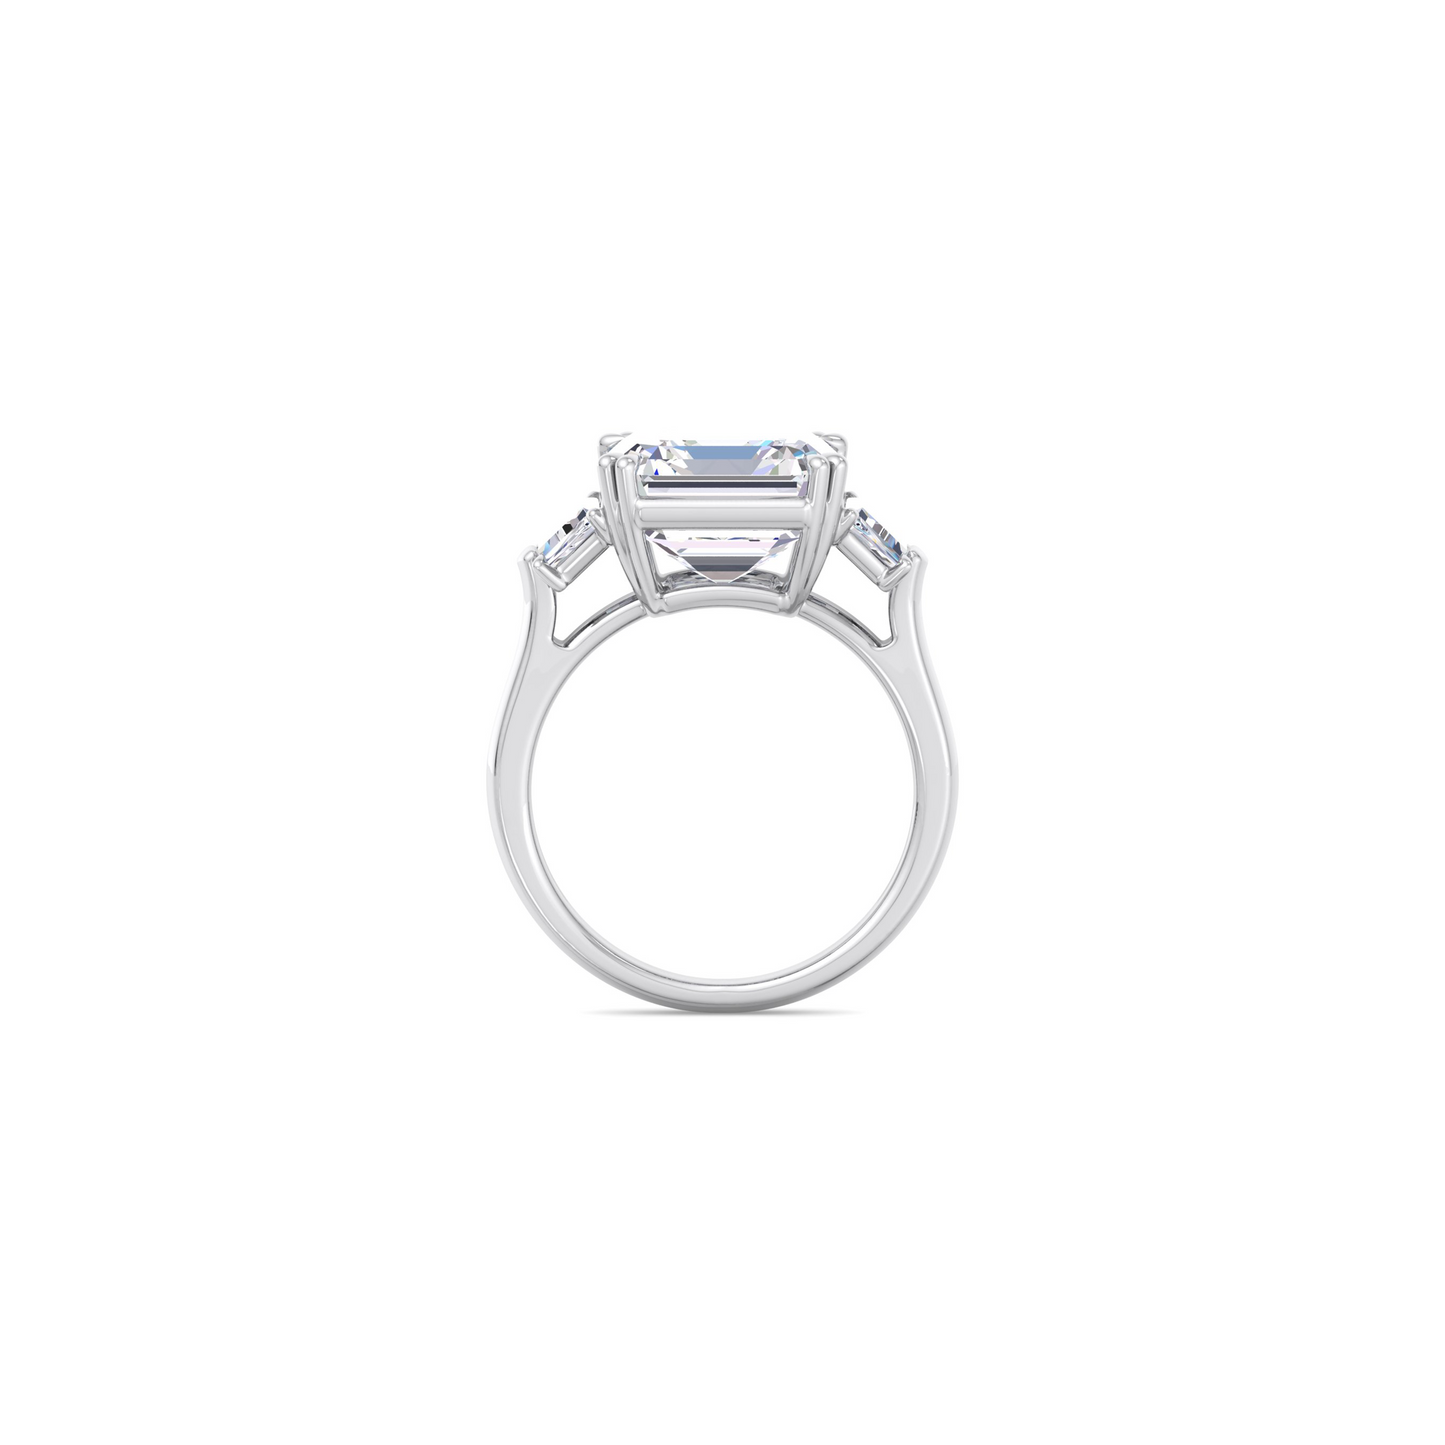 Captivating Curves: Lab-Grown Diamond Ring in TRP and L.RD Shapes – Timeless Elegance, Ethically Crafted!